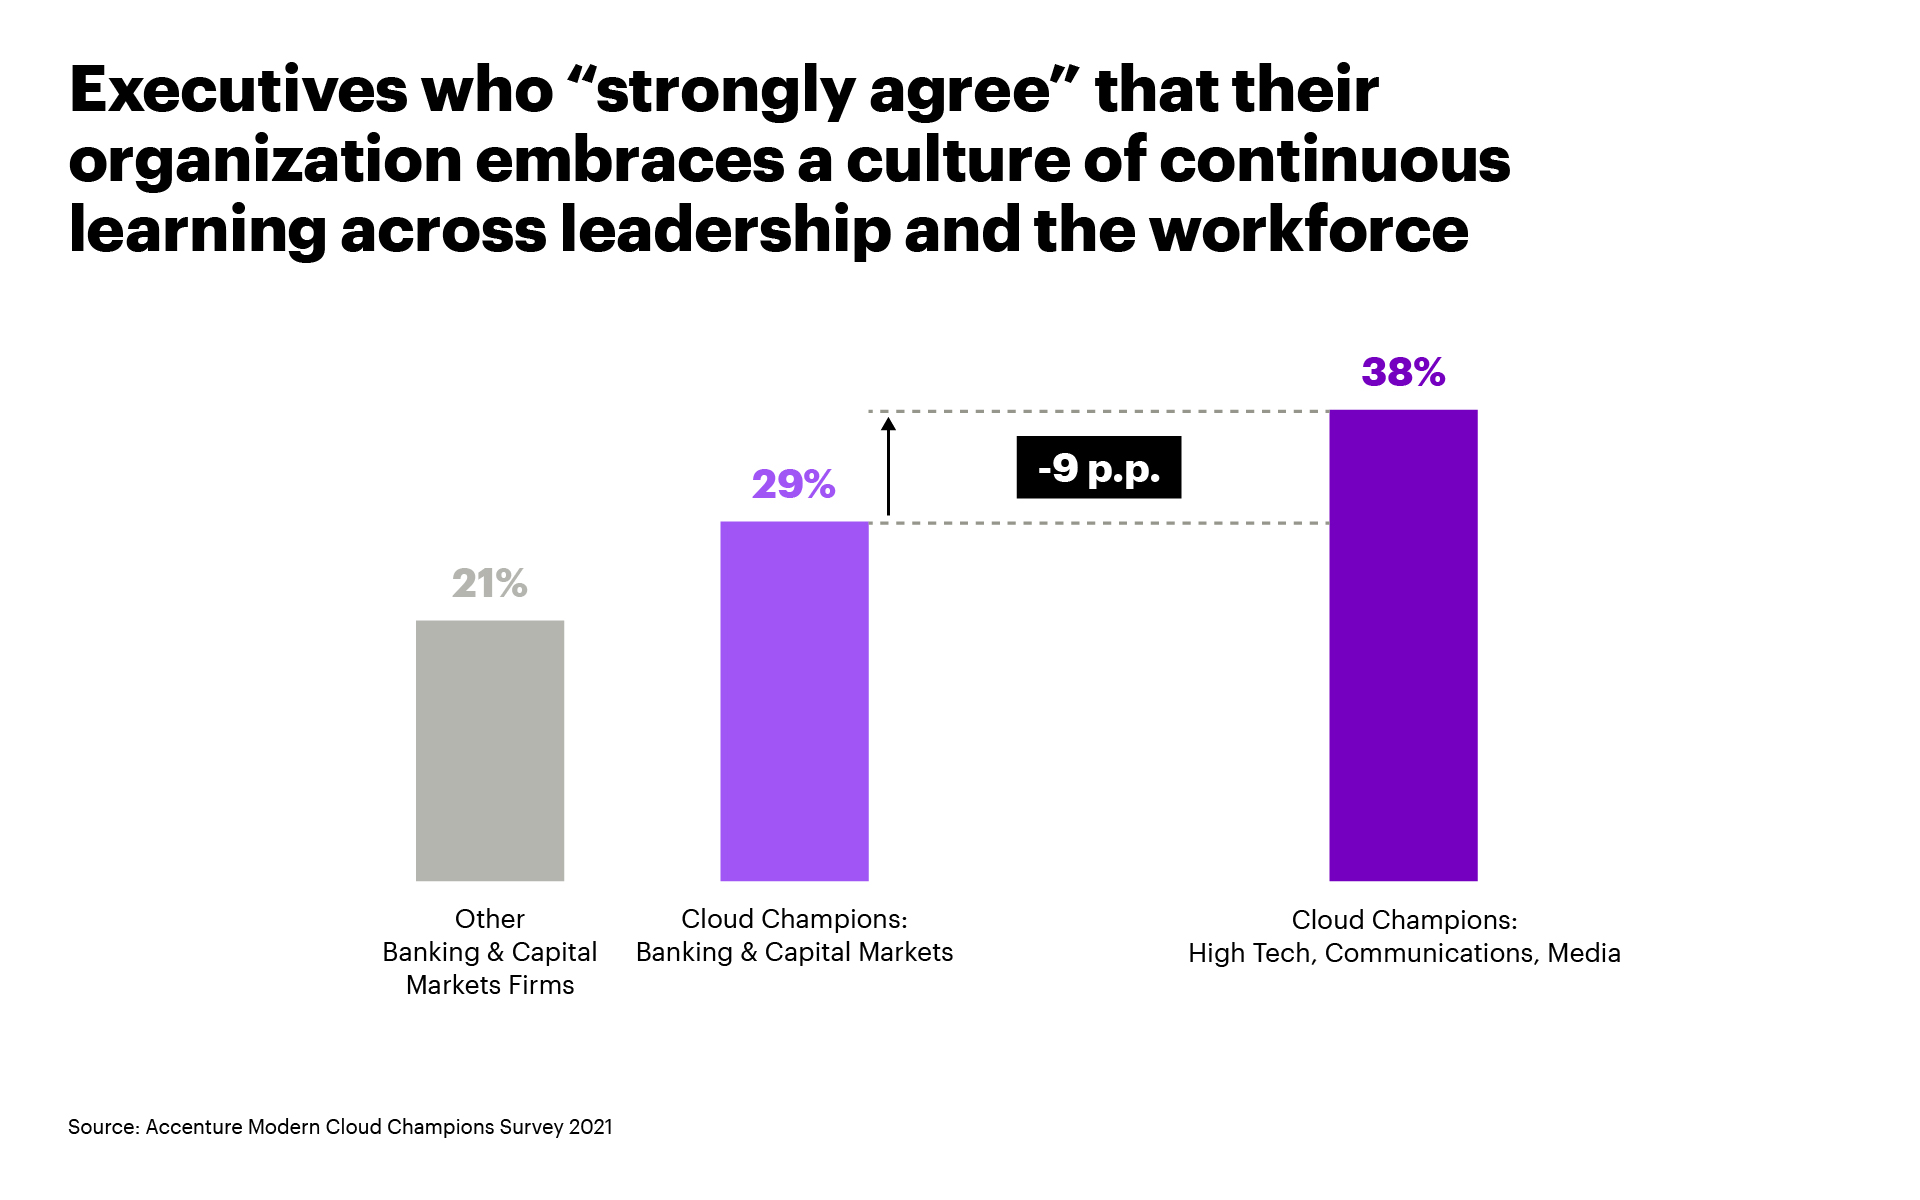 Executives who "strongly agree" that their organization embraces a culture of continuous learning across leadership and the workforce